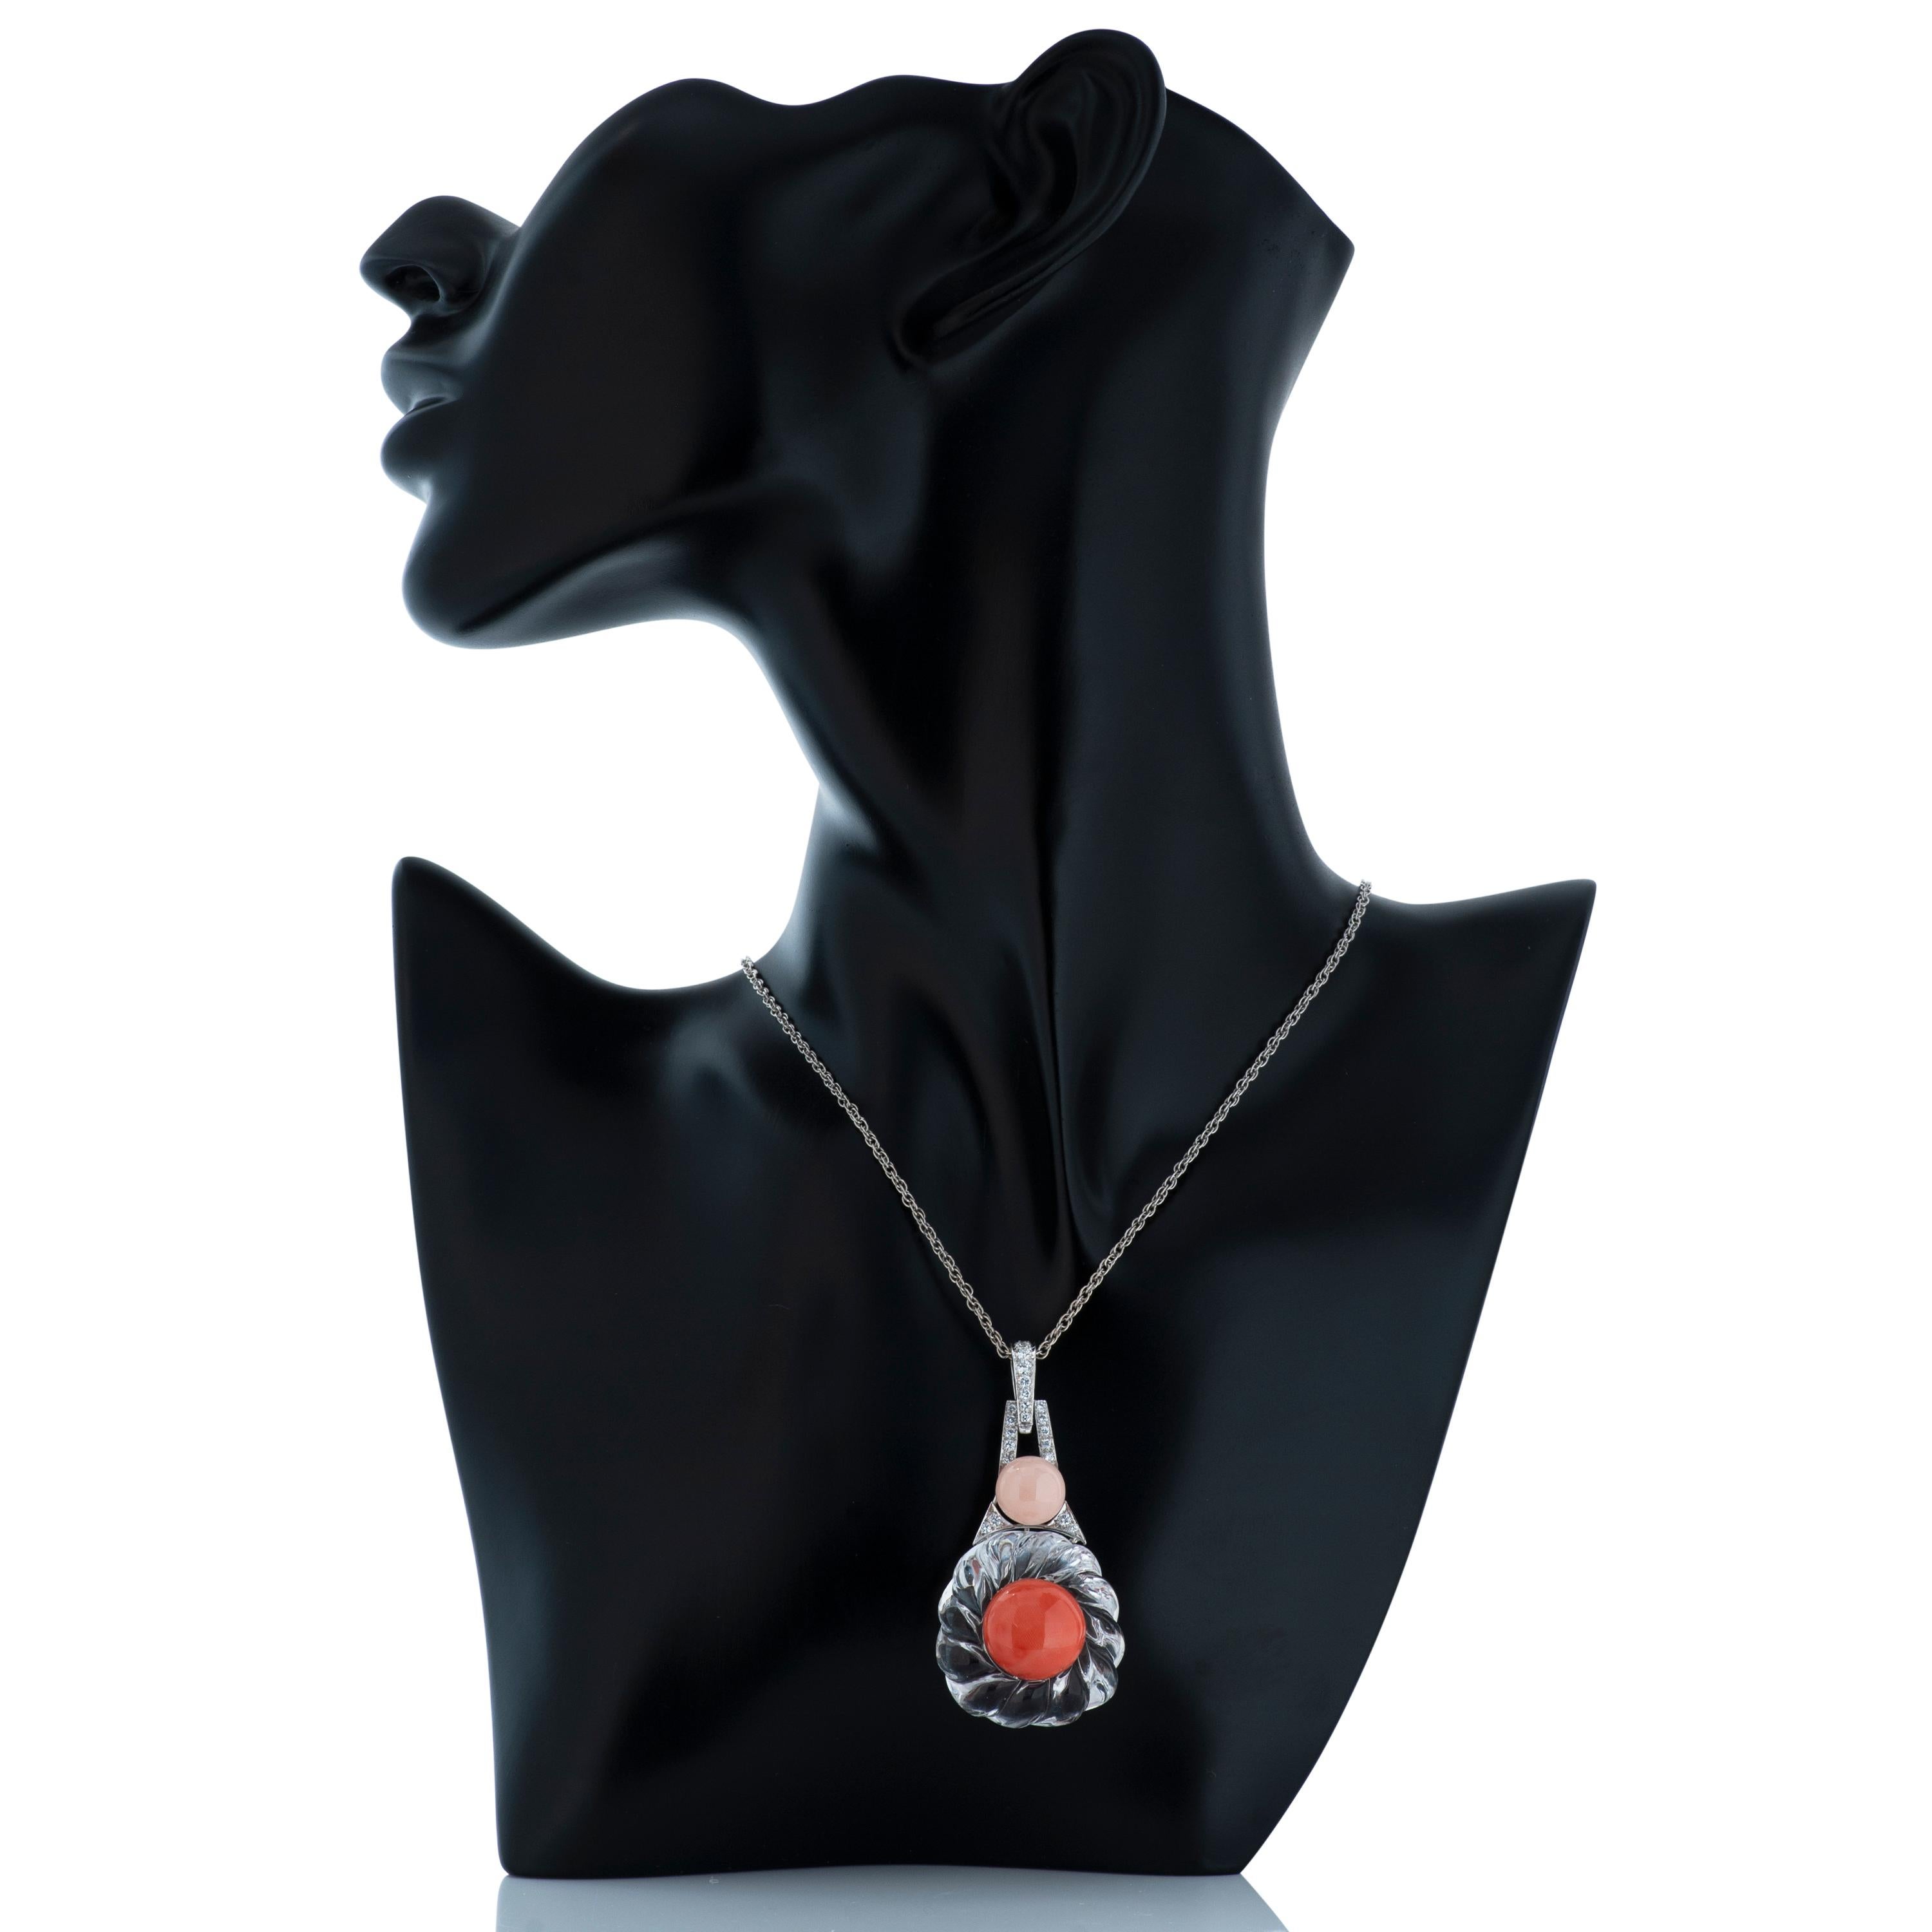 David Webb carved rock crystal, coral, angelskin coral and diamond pendant set in platinum and 14k white gold, on an 18k white gold chain.  The base of this pendant is carved rock crystal accented by one piece of round cabochon angelskin coral, one